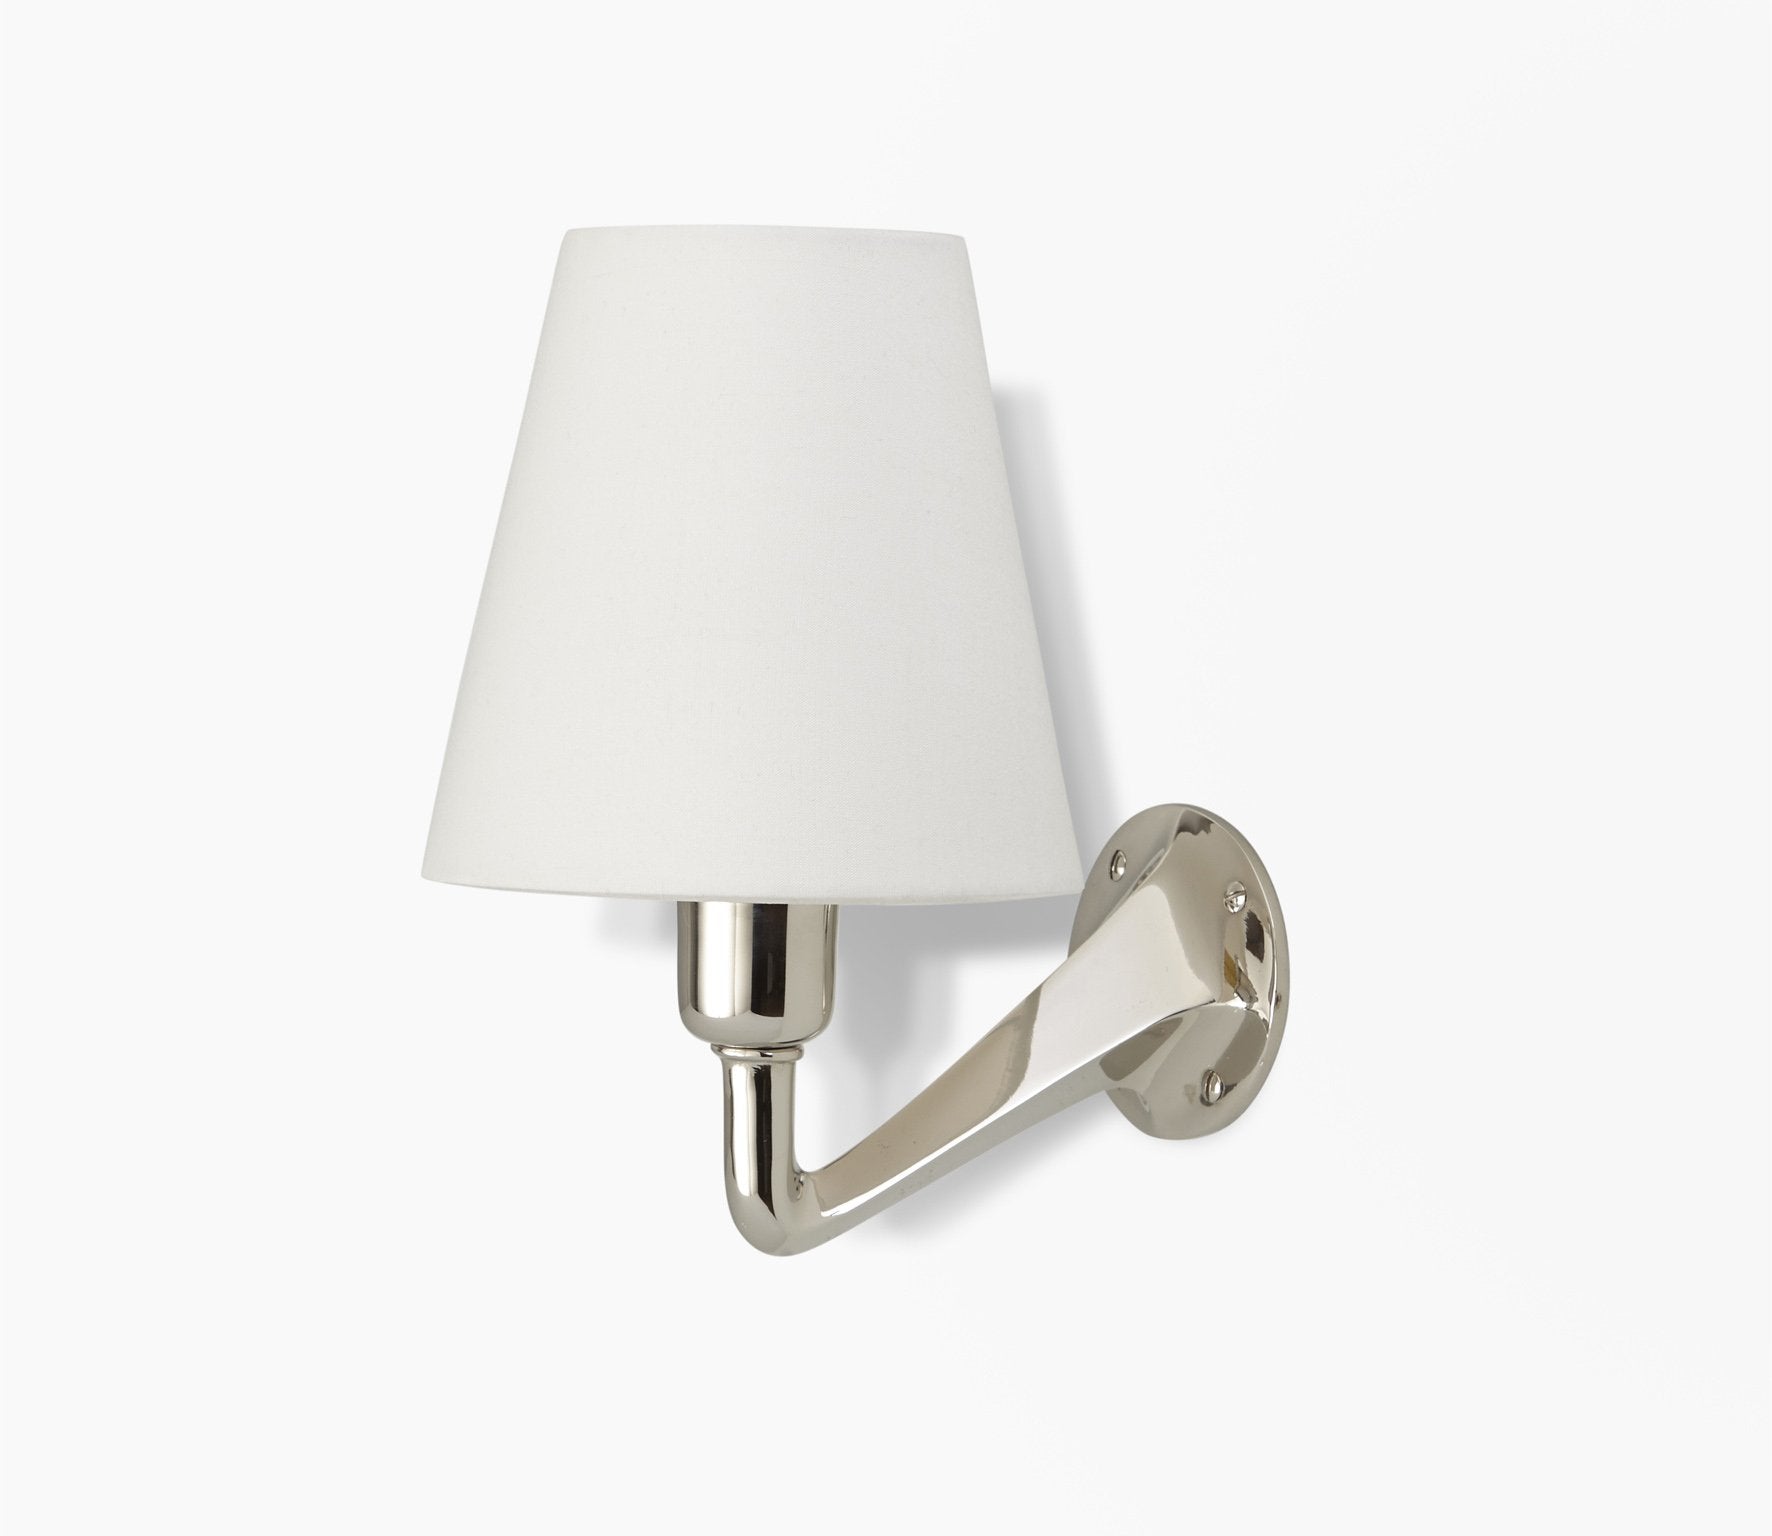 Leila Wall Light with Plain Empire Shade Product Image 9